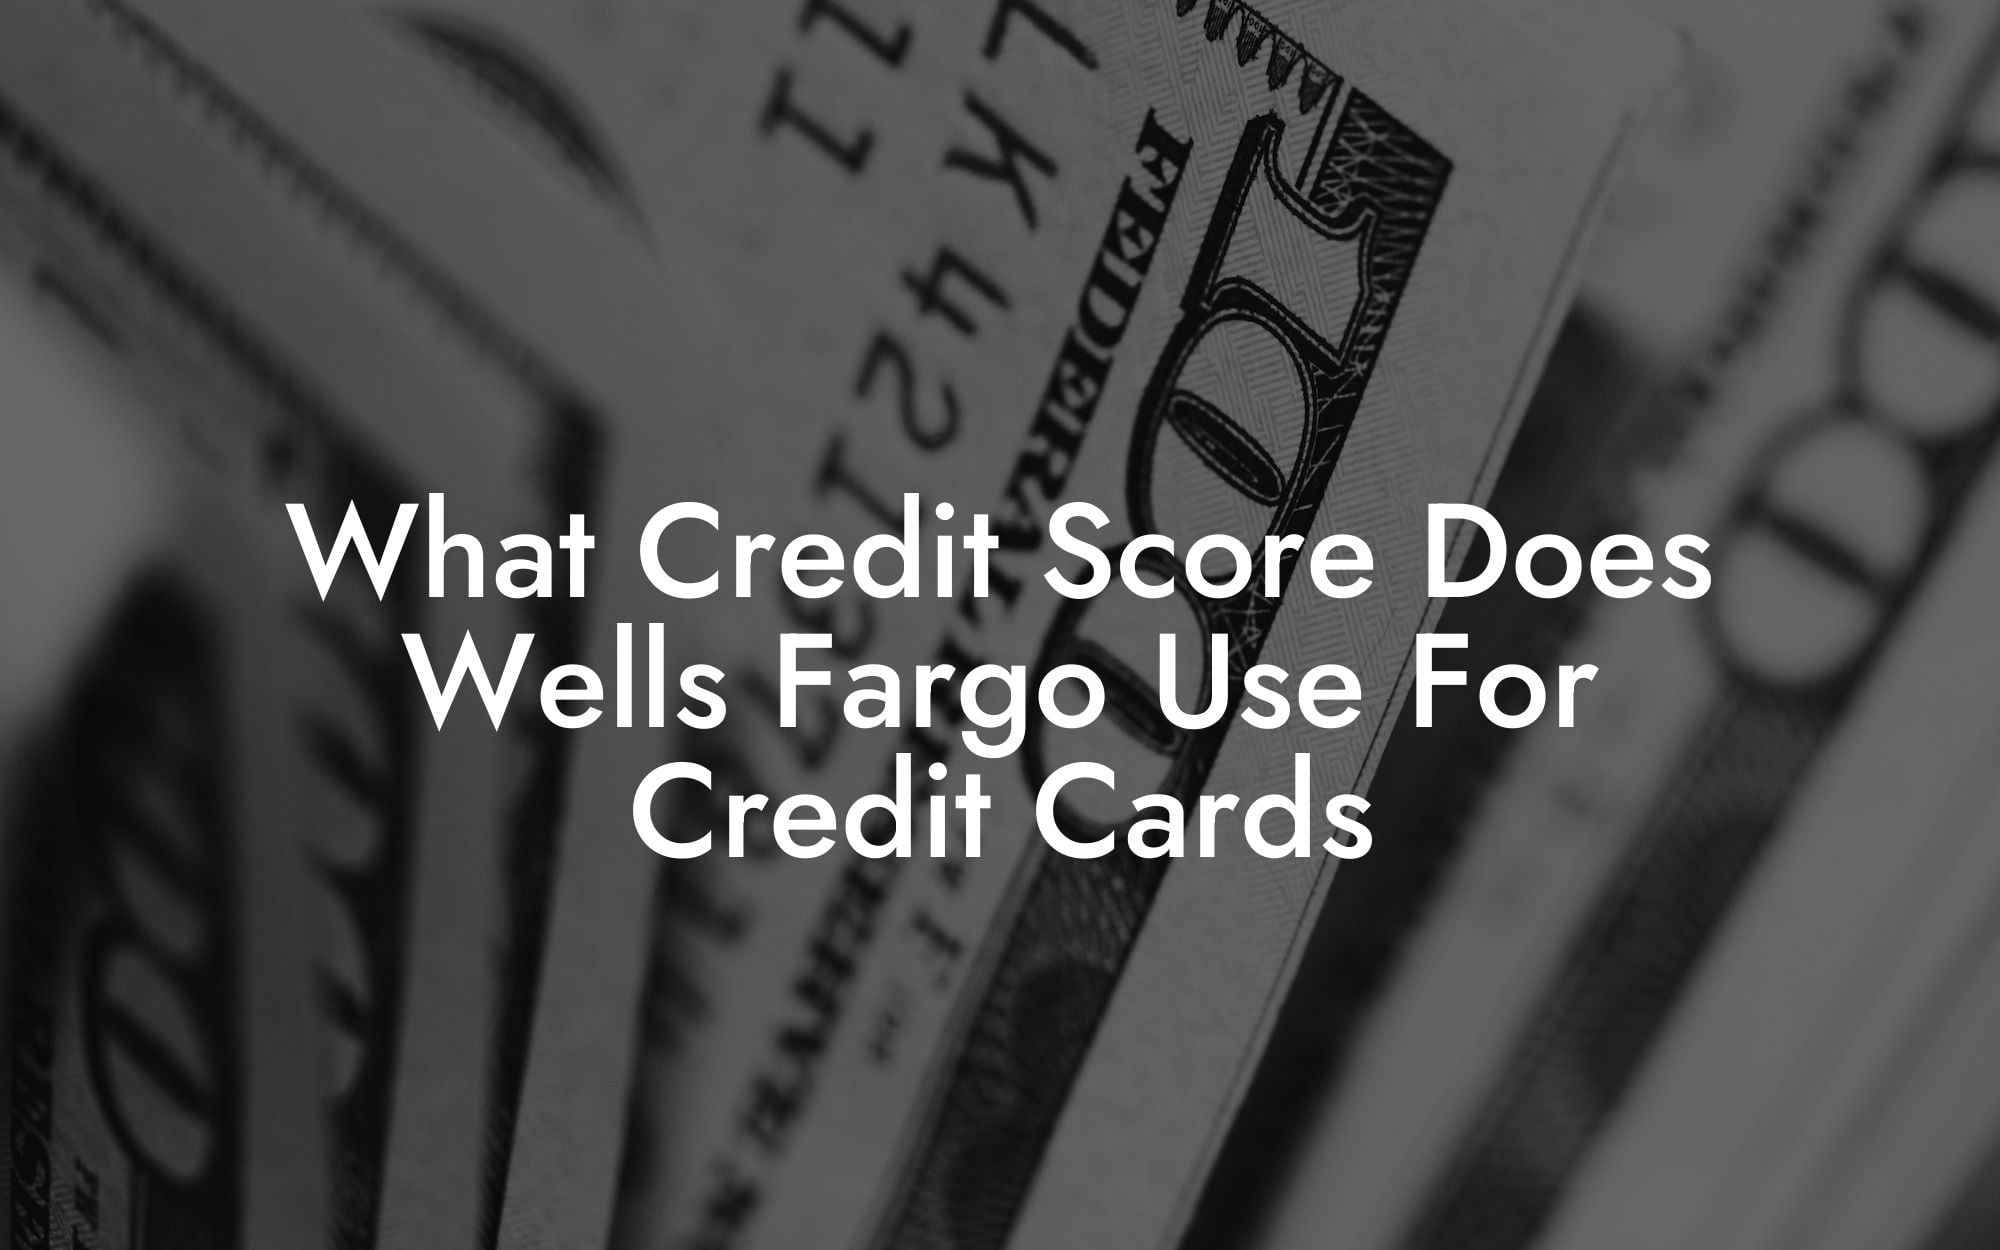 What Credit Score Does Wells Fargo Use For Credit Cards